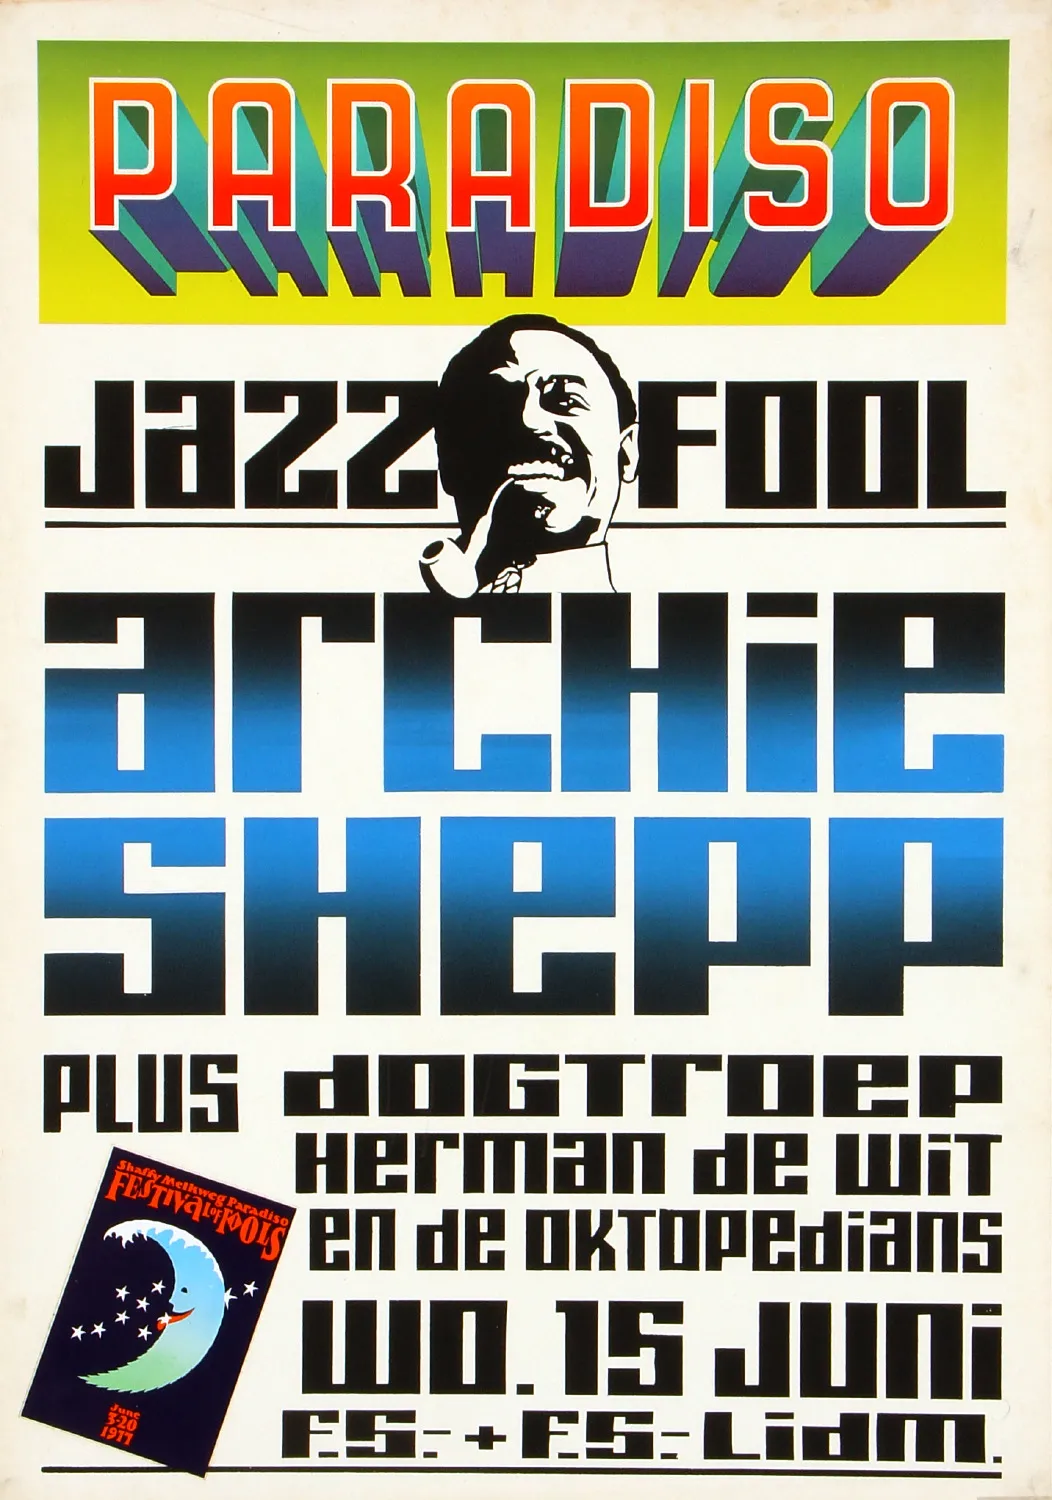 Featured image for “Archie Shepp 1977”